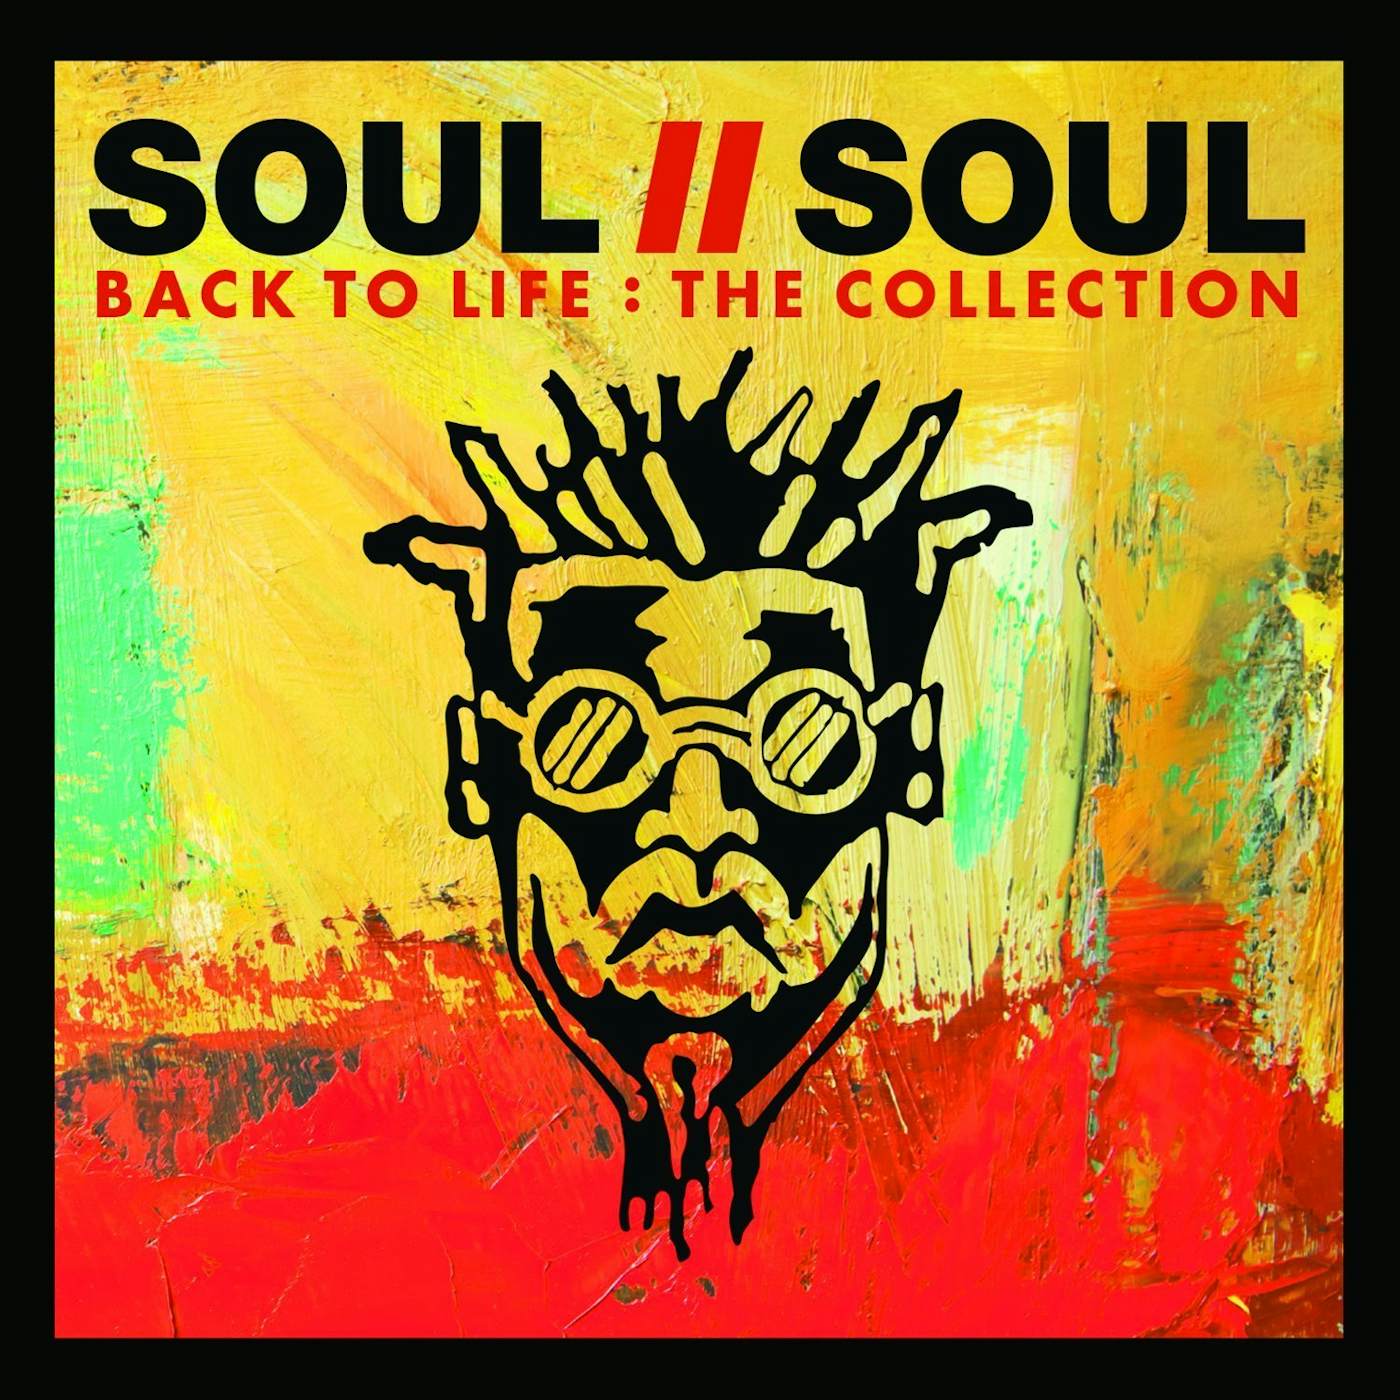 Soul II Soul BACK TO LIFE: THE COLLECTION CD